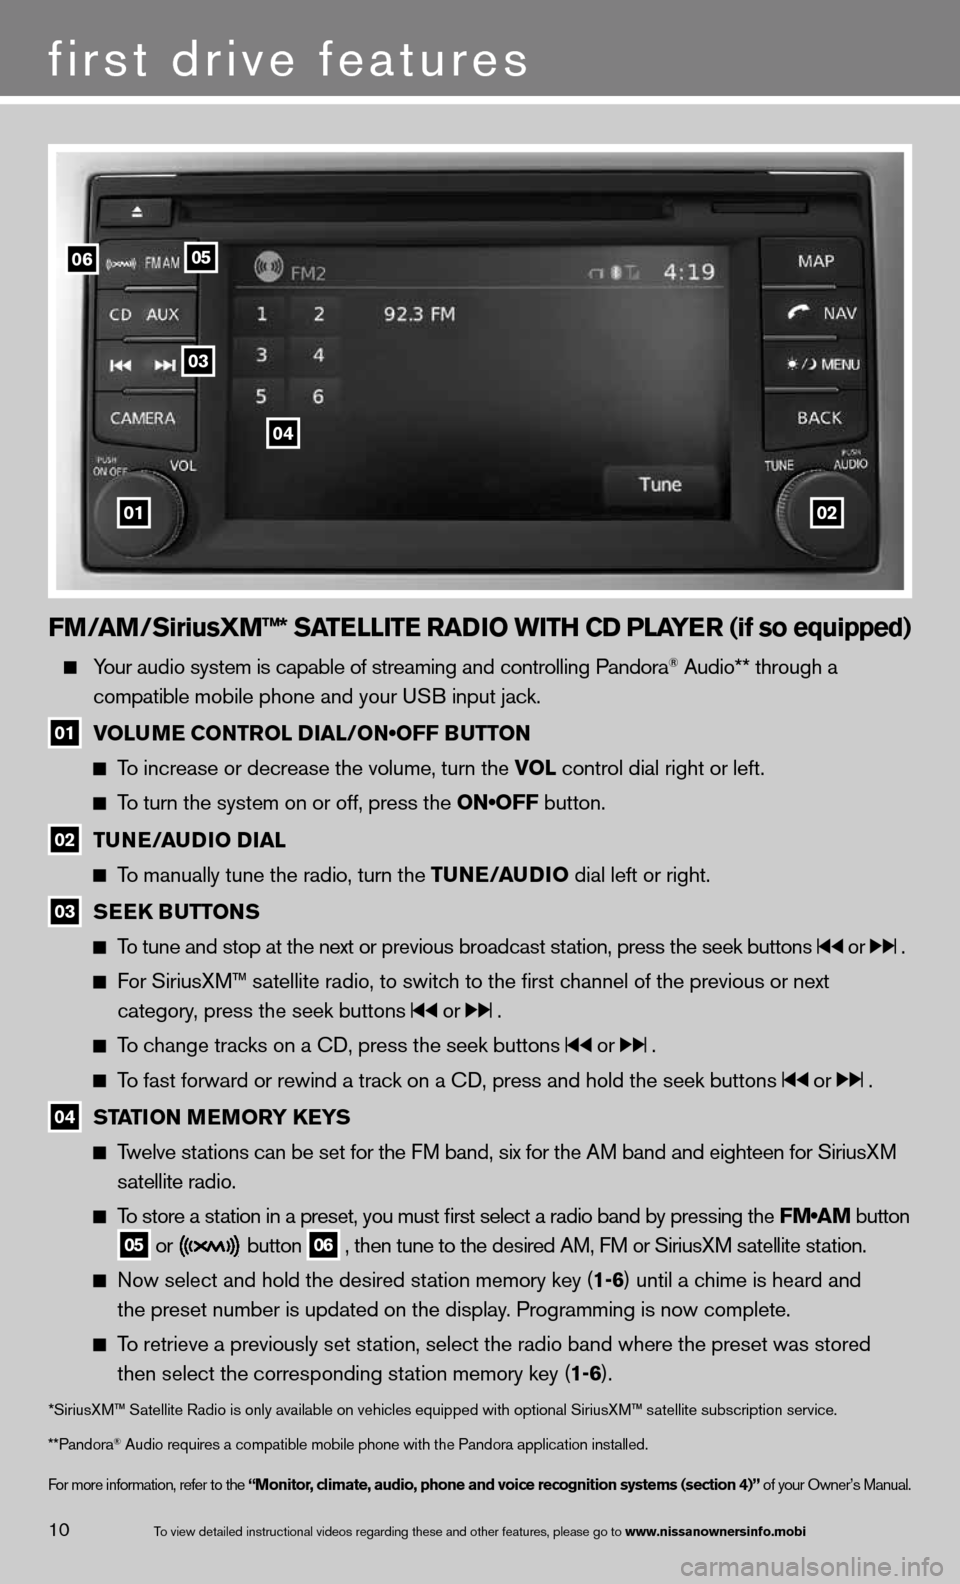 NISSAN TITAN 2013 1.G Quick Reference Guide FM/AM/SiriusXM™* SATELLITE RADIO WITh CD PLAYER (if so equipped)
  Your audio system is capable of streaming and controlling Pandora® Audio** through a   
    compatible mobile phone and your u SB 